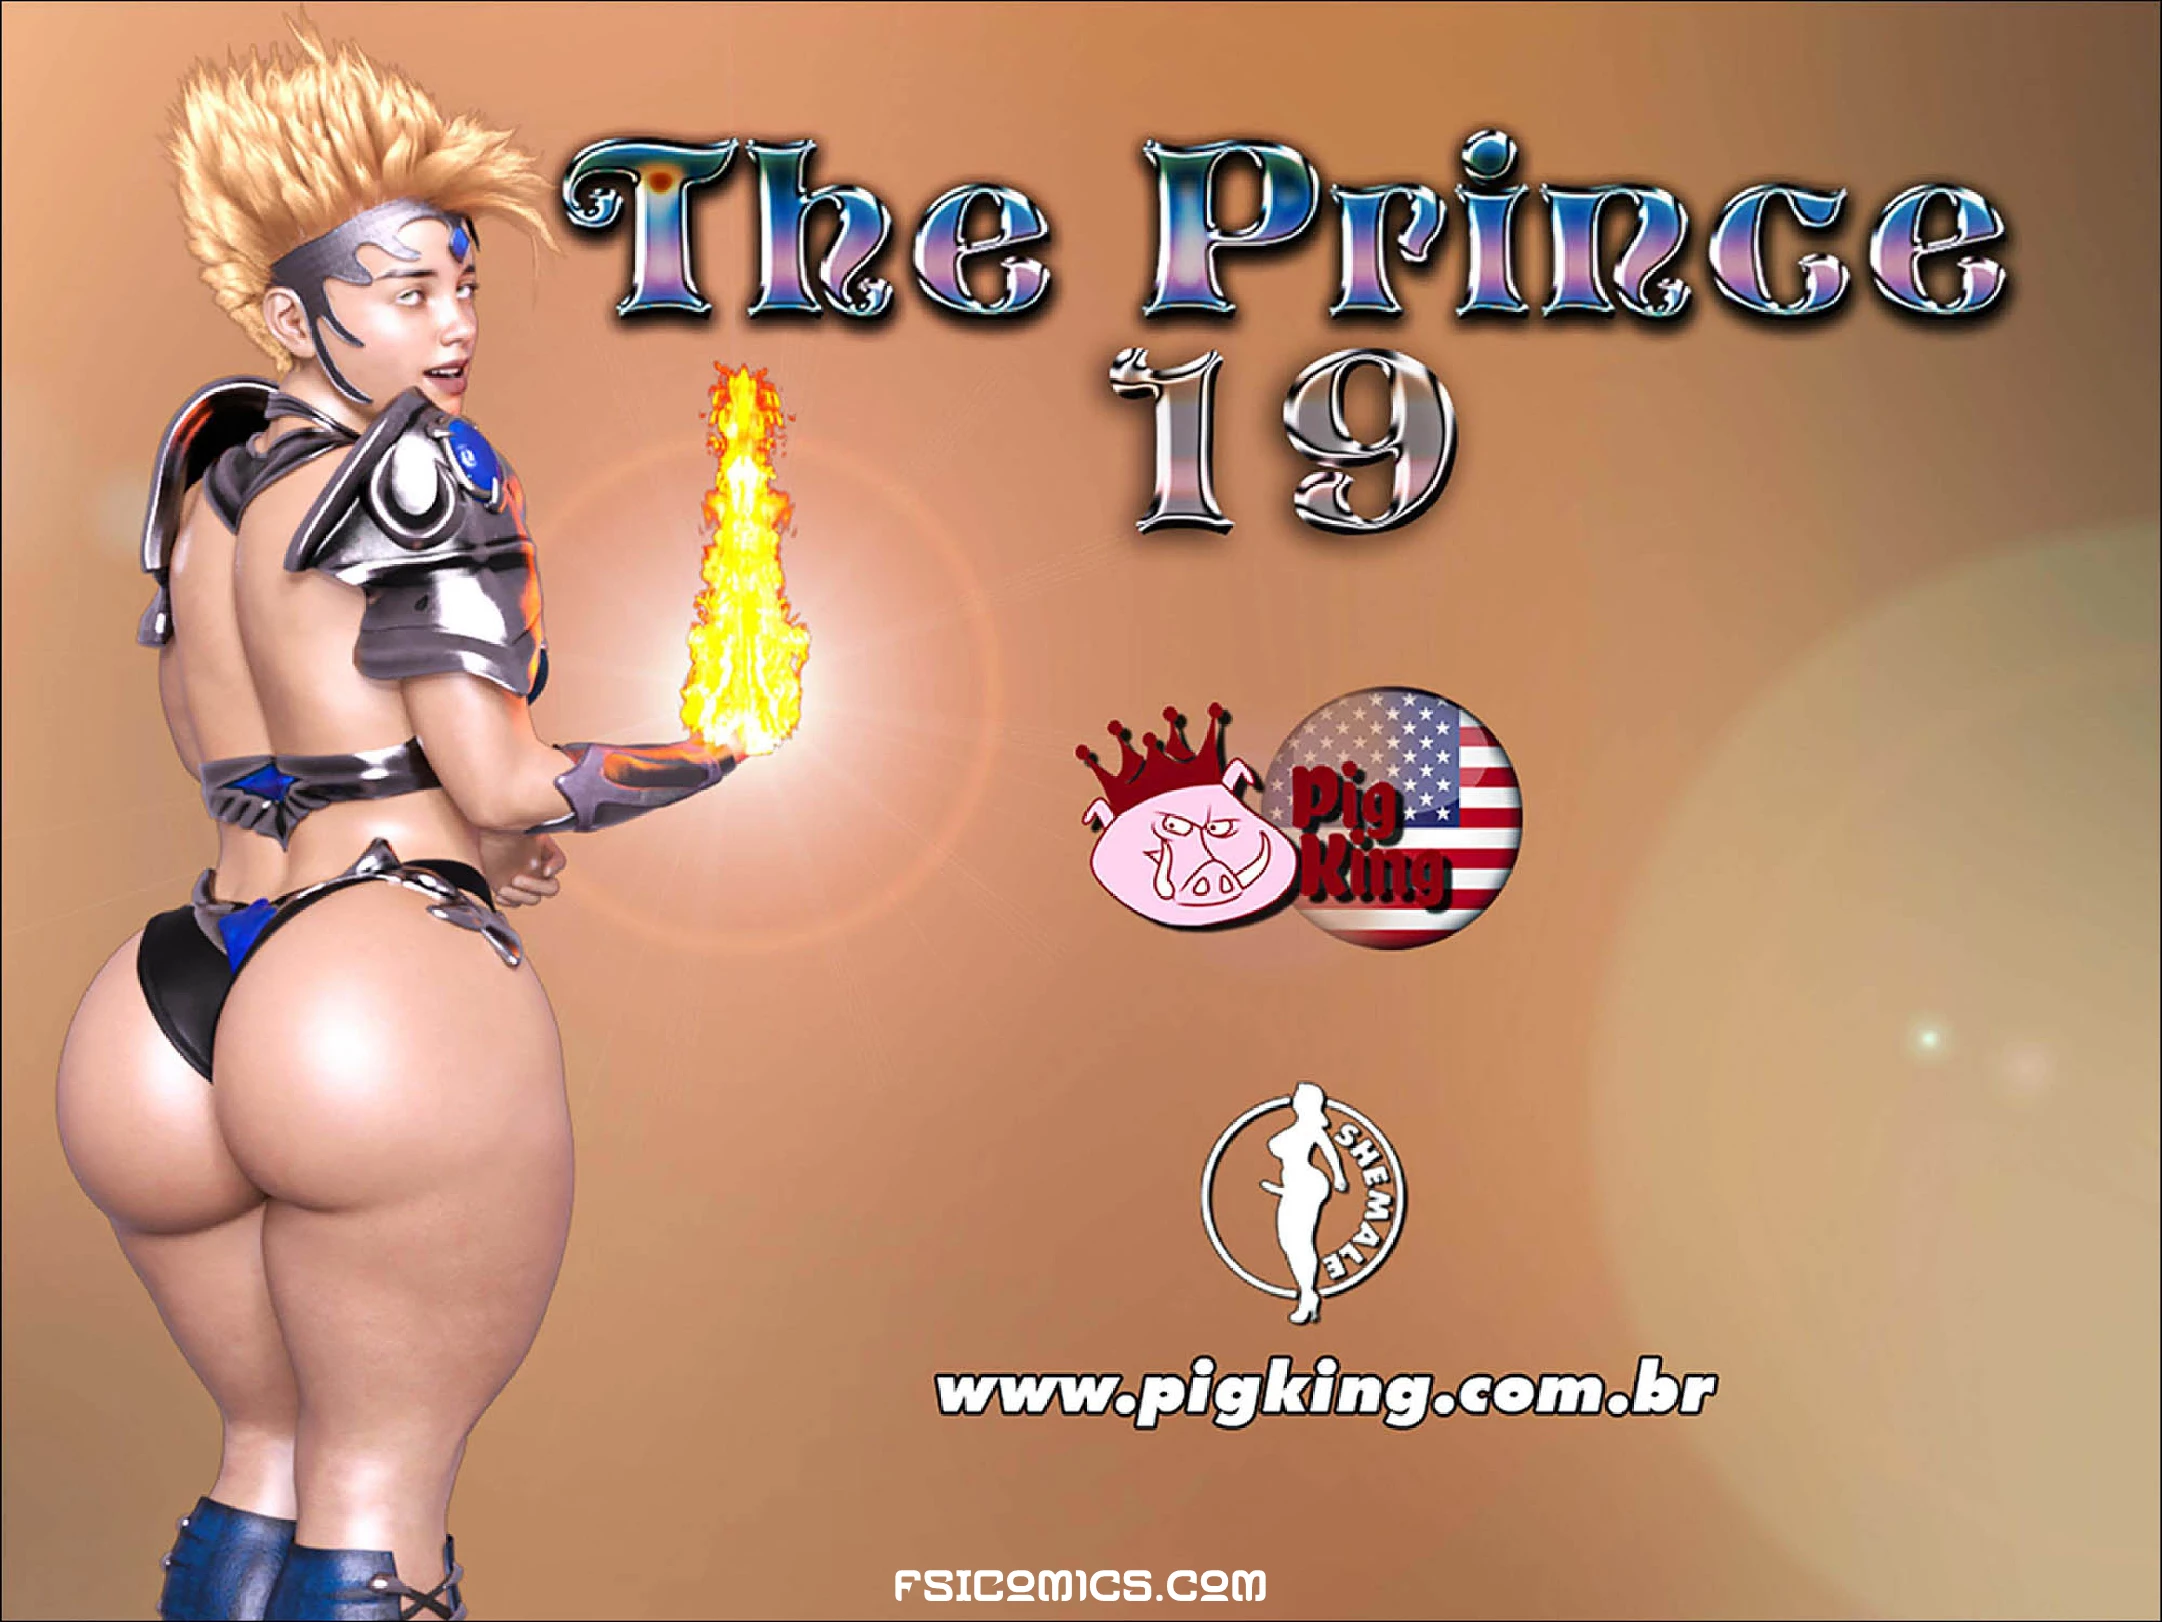 The Prince Chapter 19 – PigKing - 221 - FSIComics